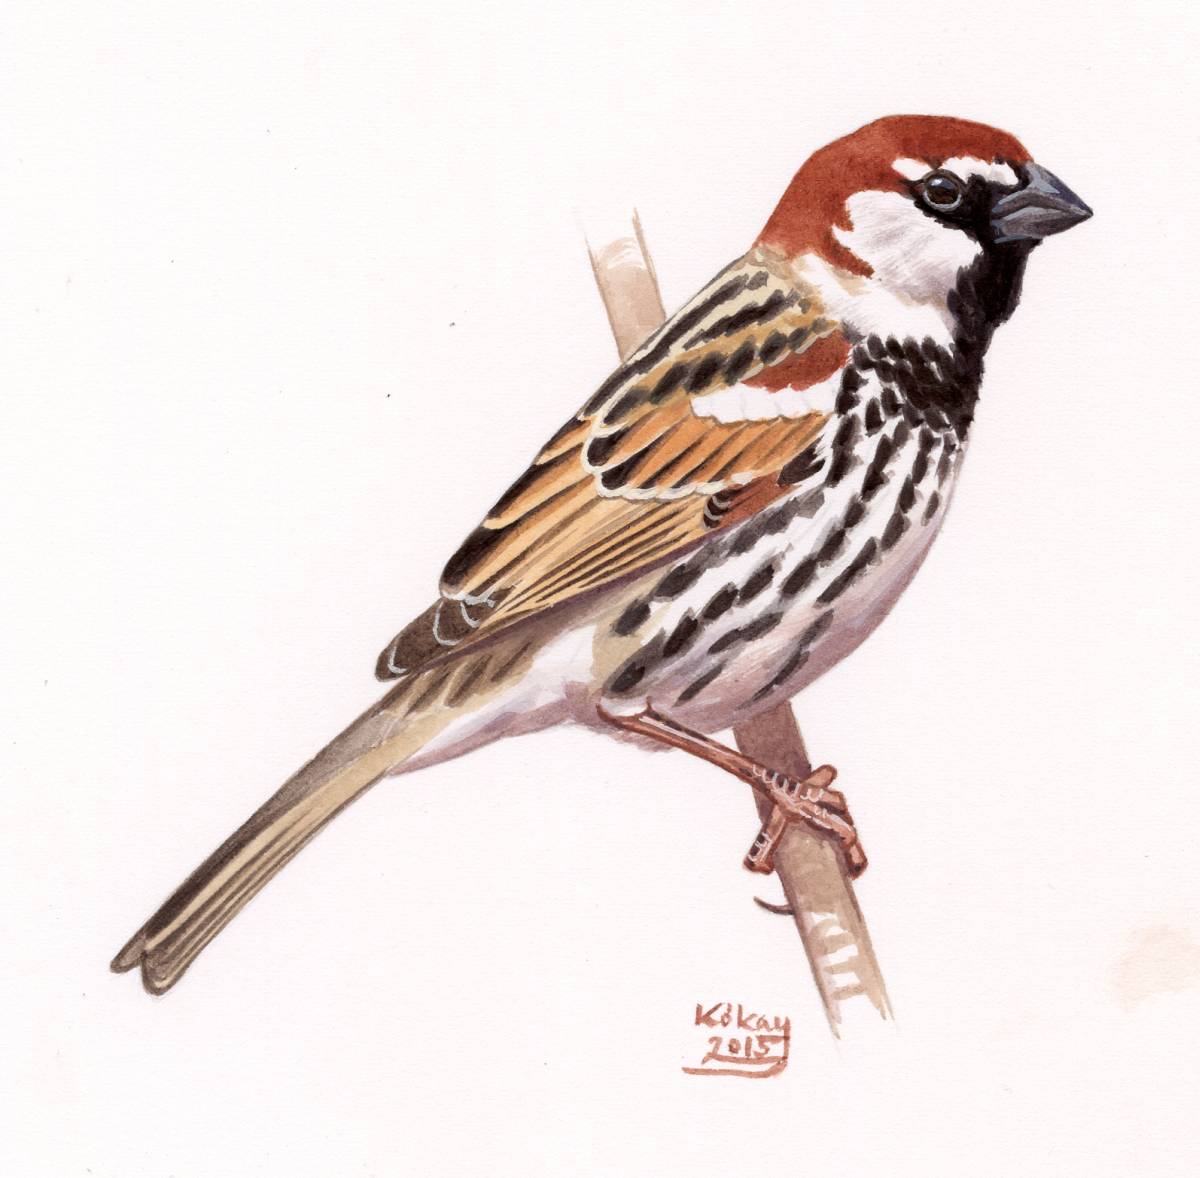 Spanish Sparrow (Passer hispaniolensis), watercolour and bodycolour on paper